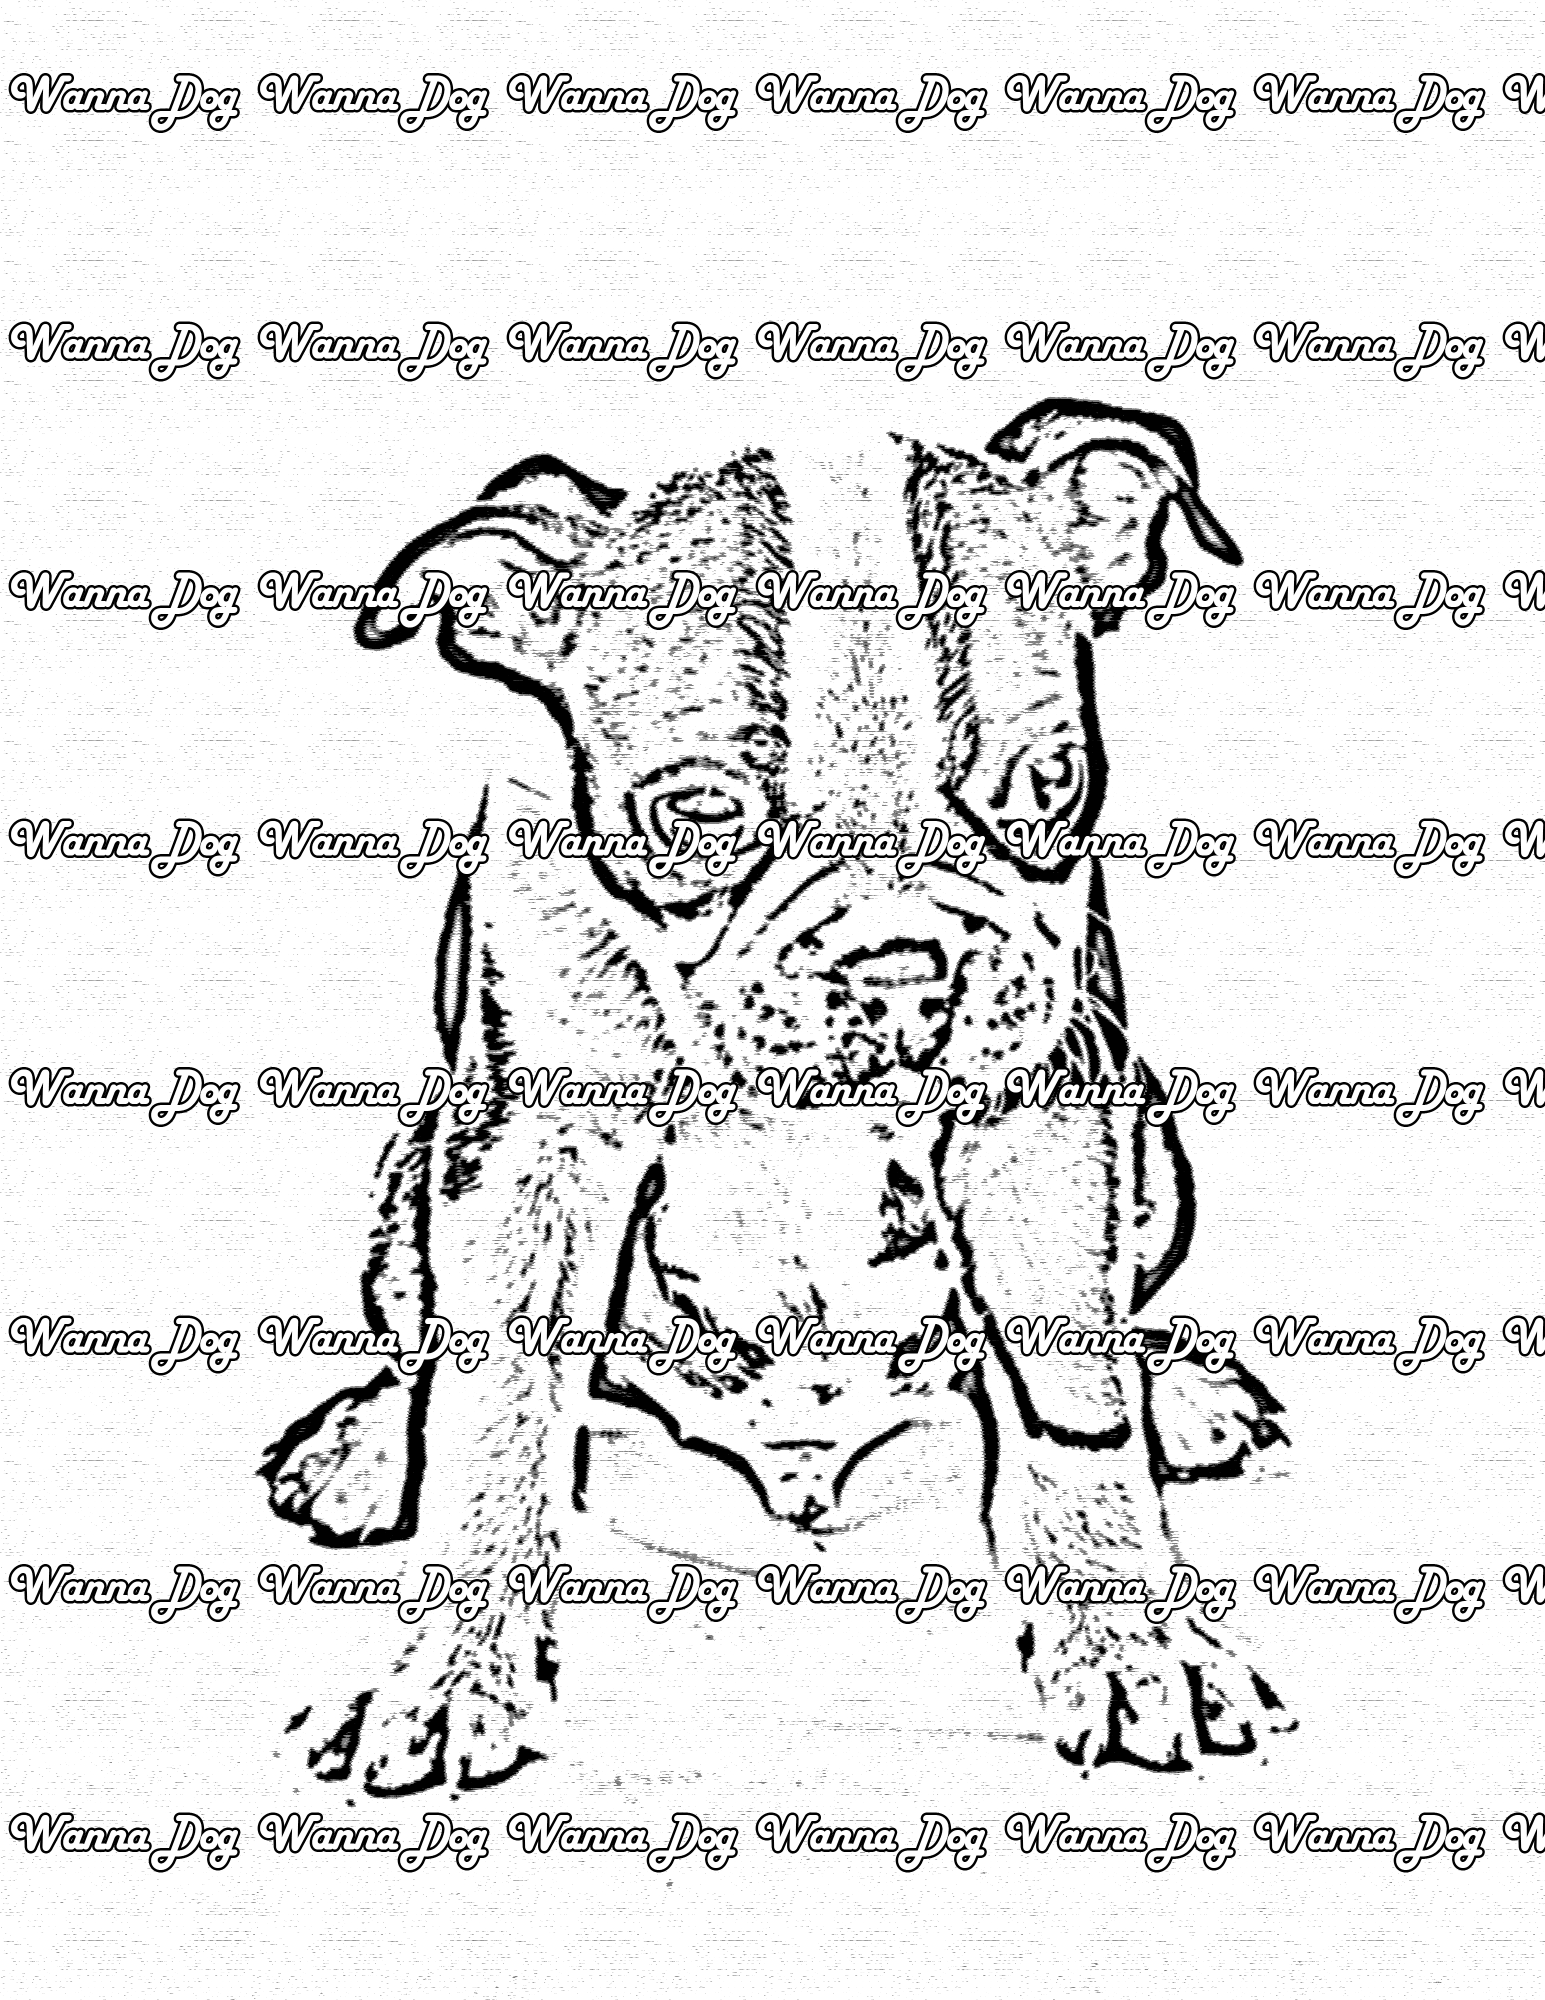 Boston Terrier Coloring Page of a Boston Terrier standing and looking down